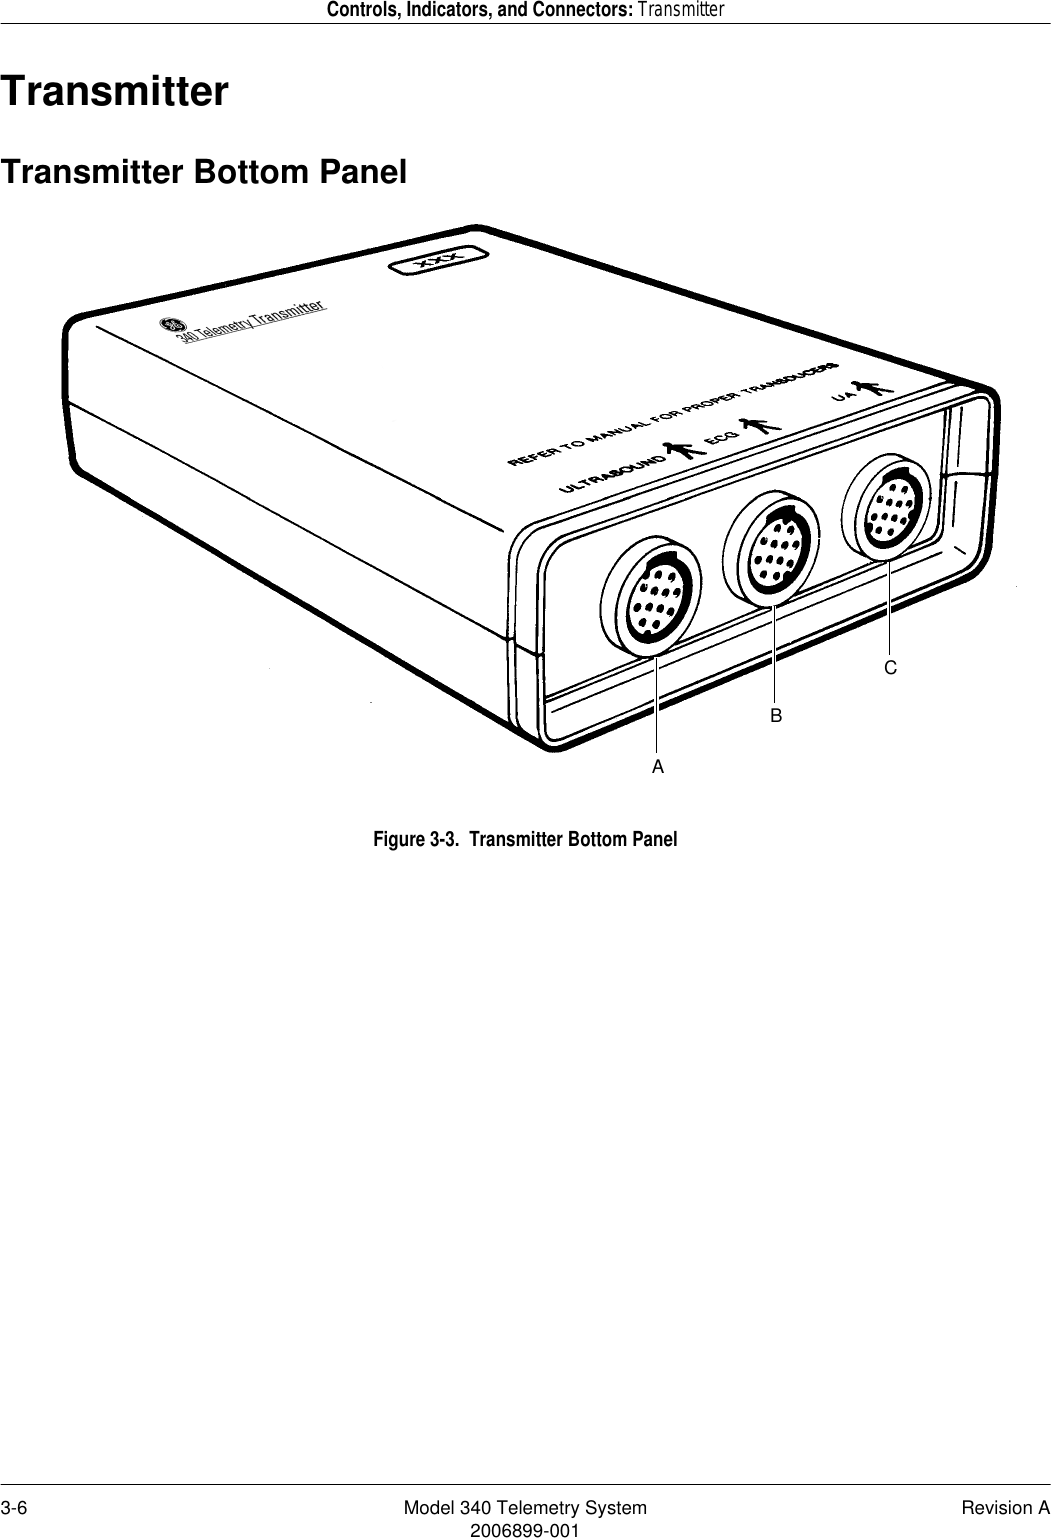 3-6 Model 340 Telemetry System Revision A2006899-001Controls, Indicators, and Connectors: TransmitterTransmitterTransmitter Bottom PanelFigure 3-3.  Transmitter Bottom PanelACB